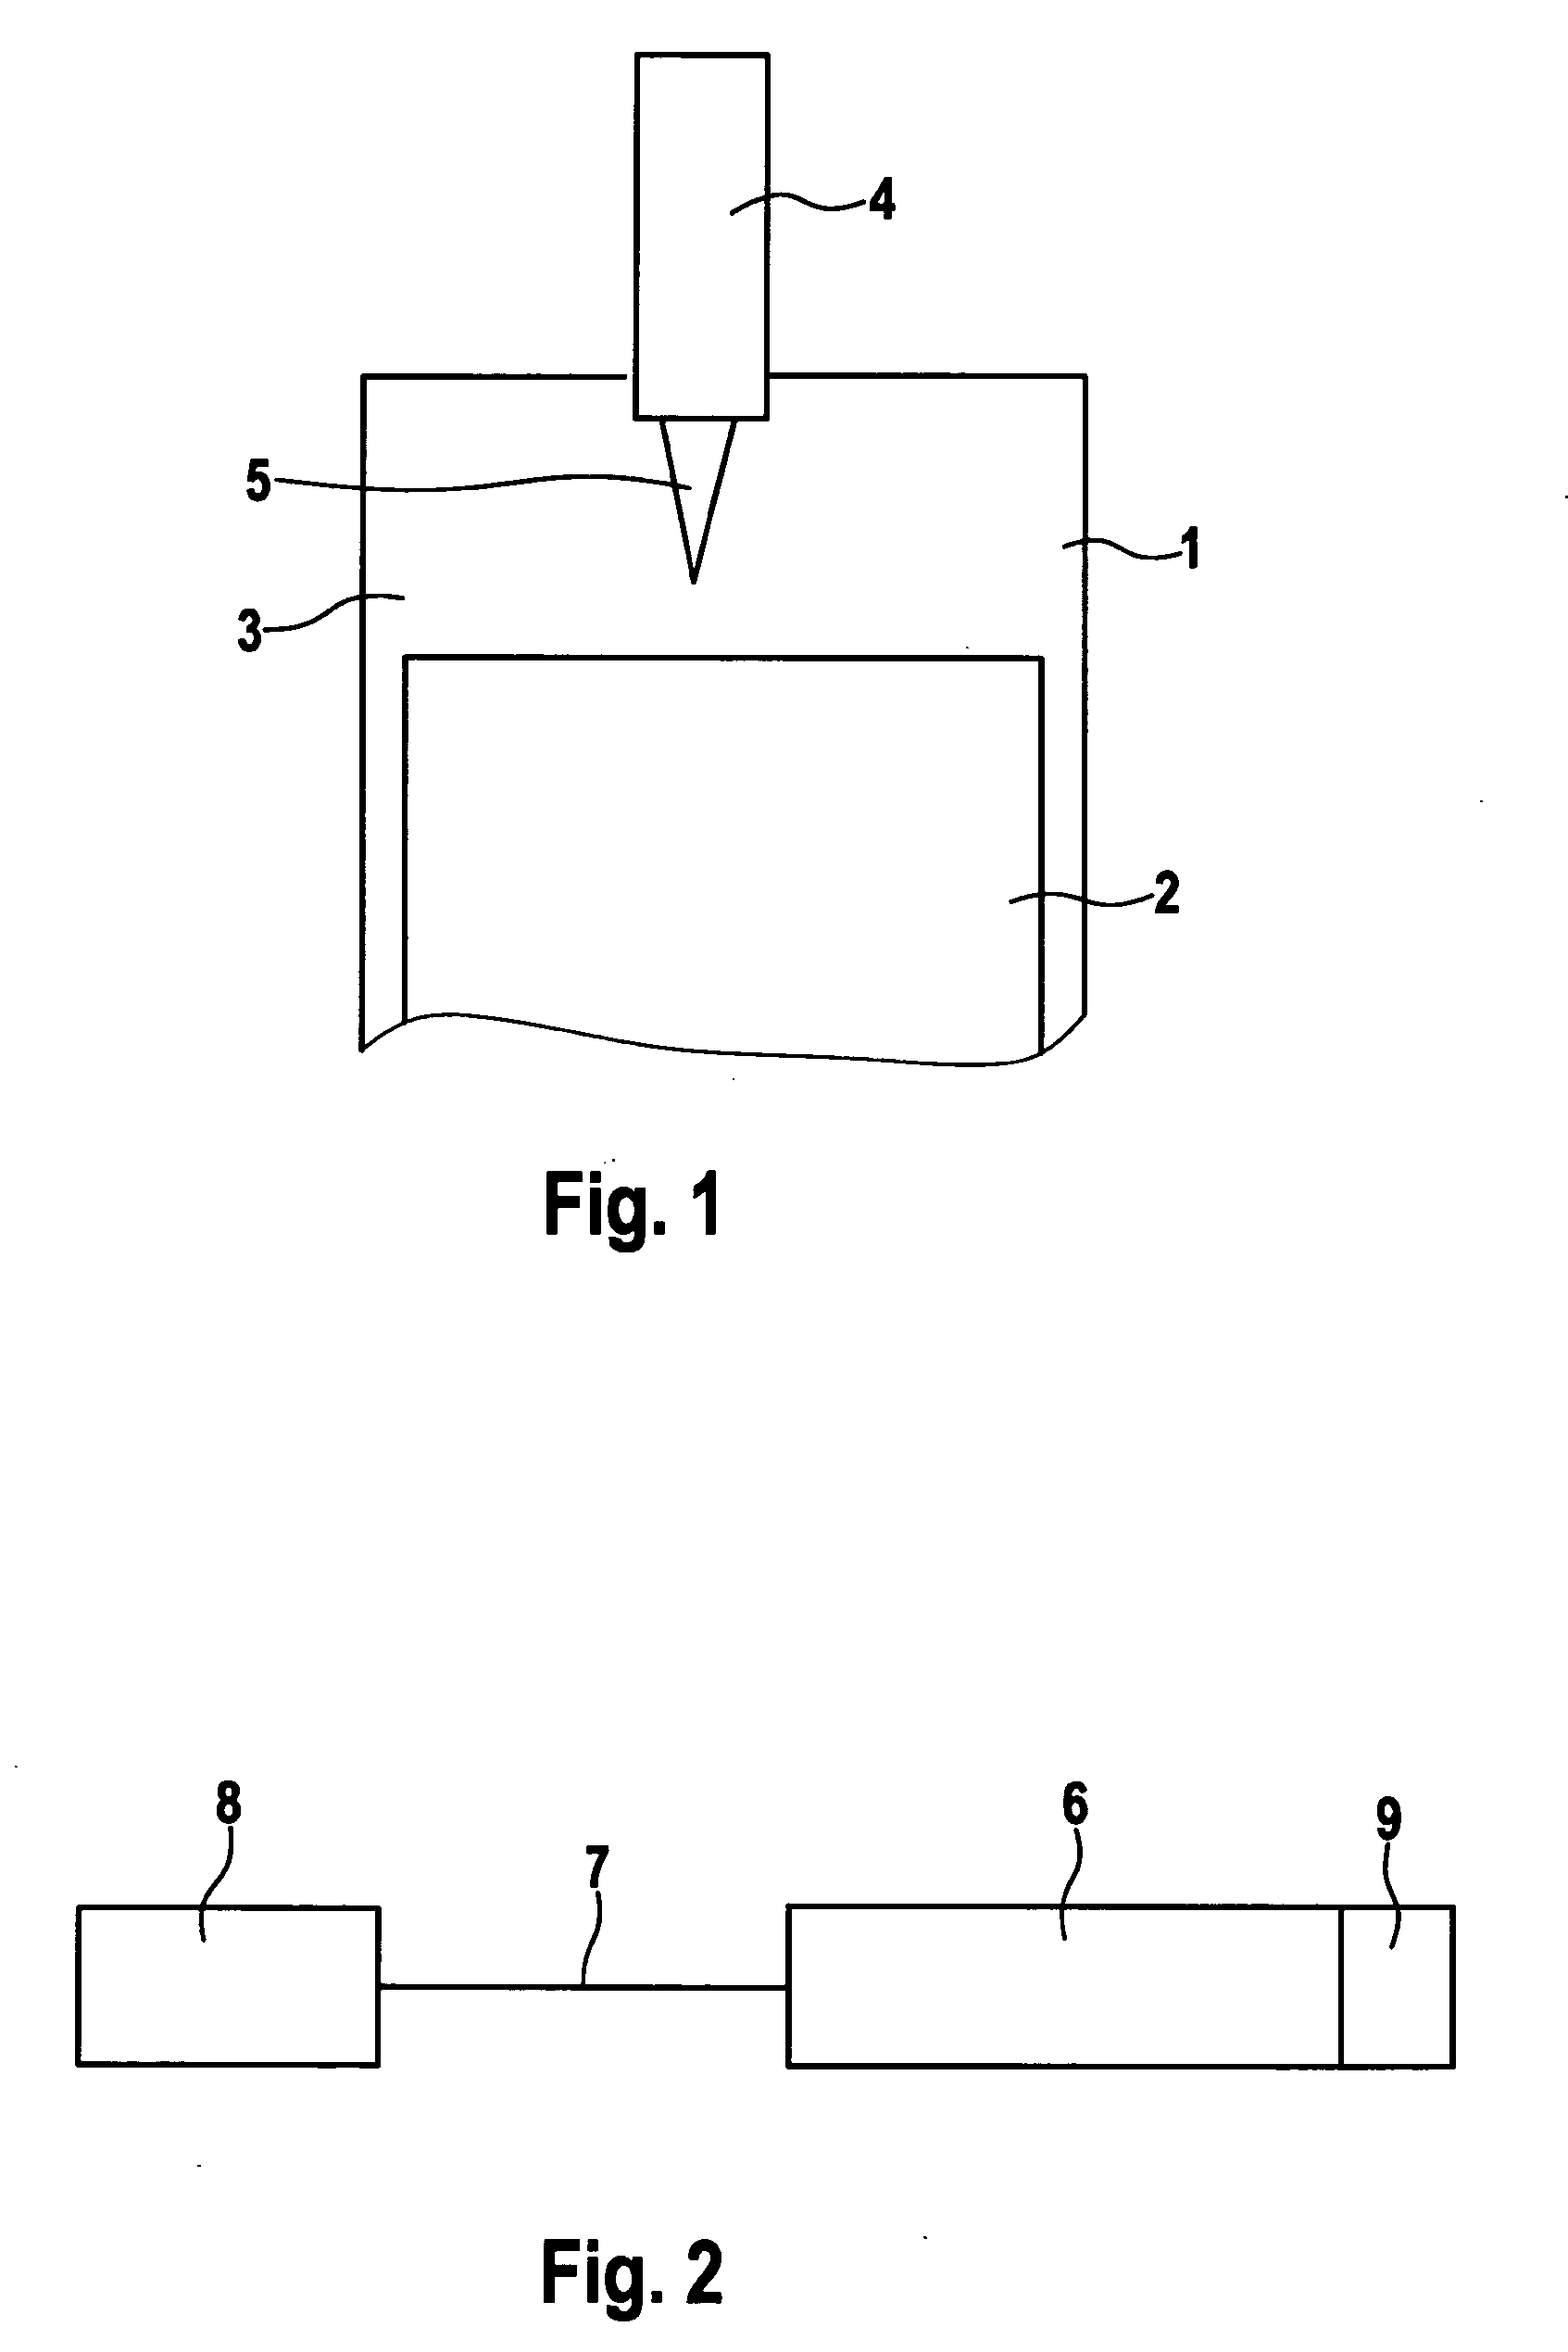 Method for operating a laser as an ignition device of an internal combustion engine